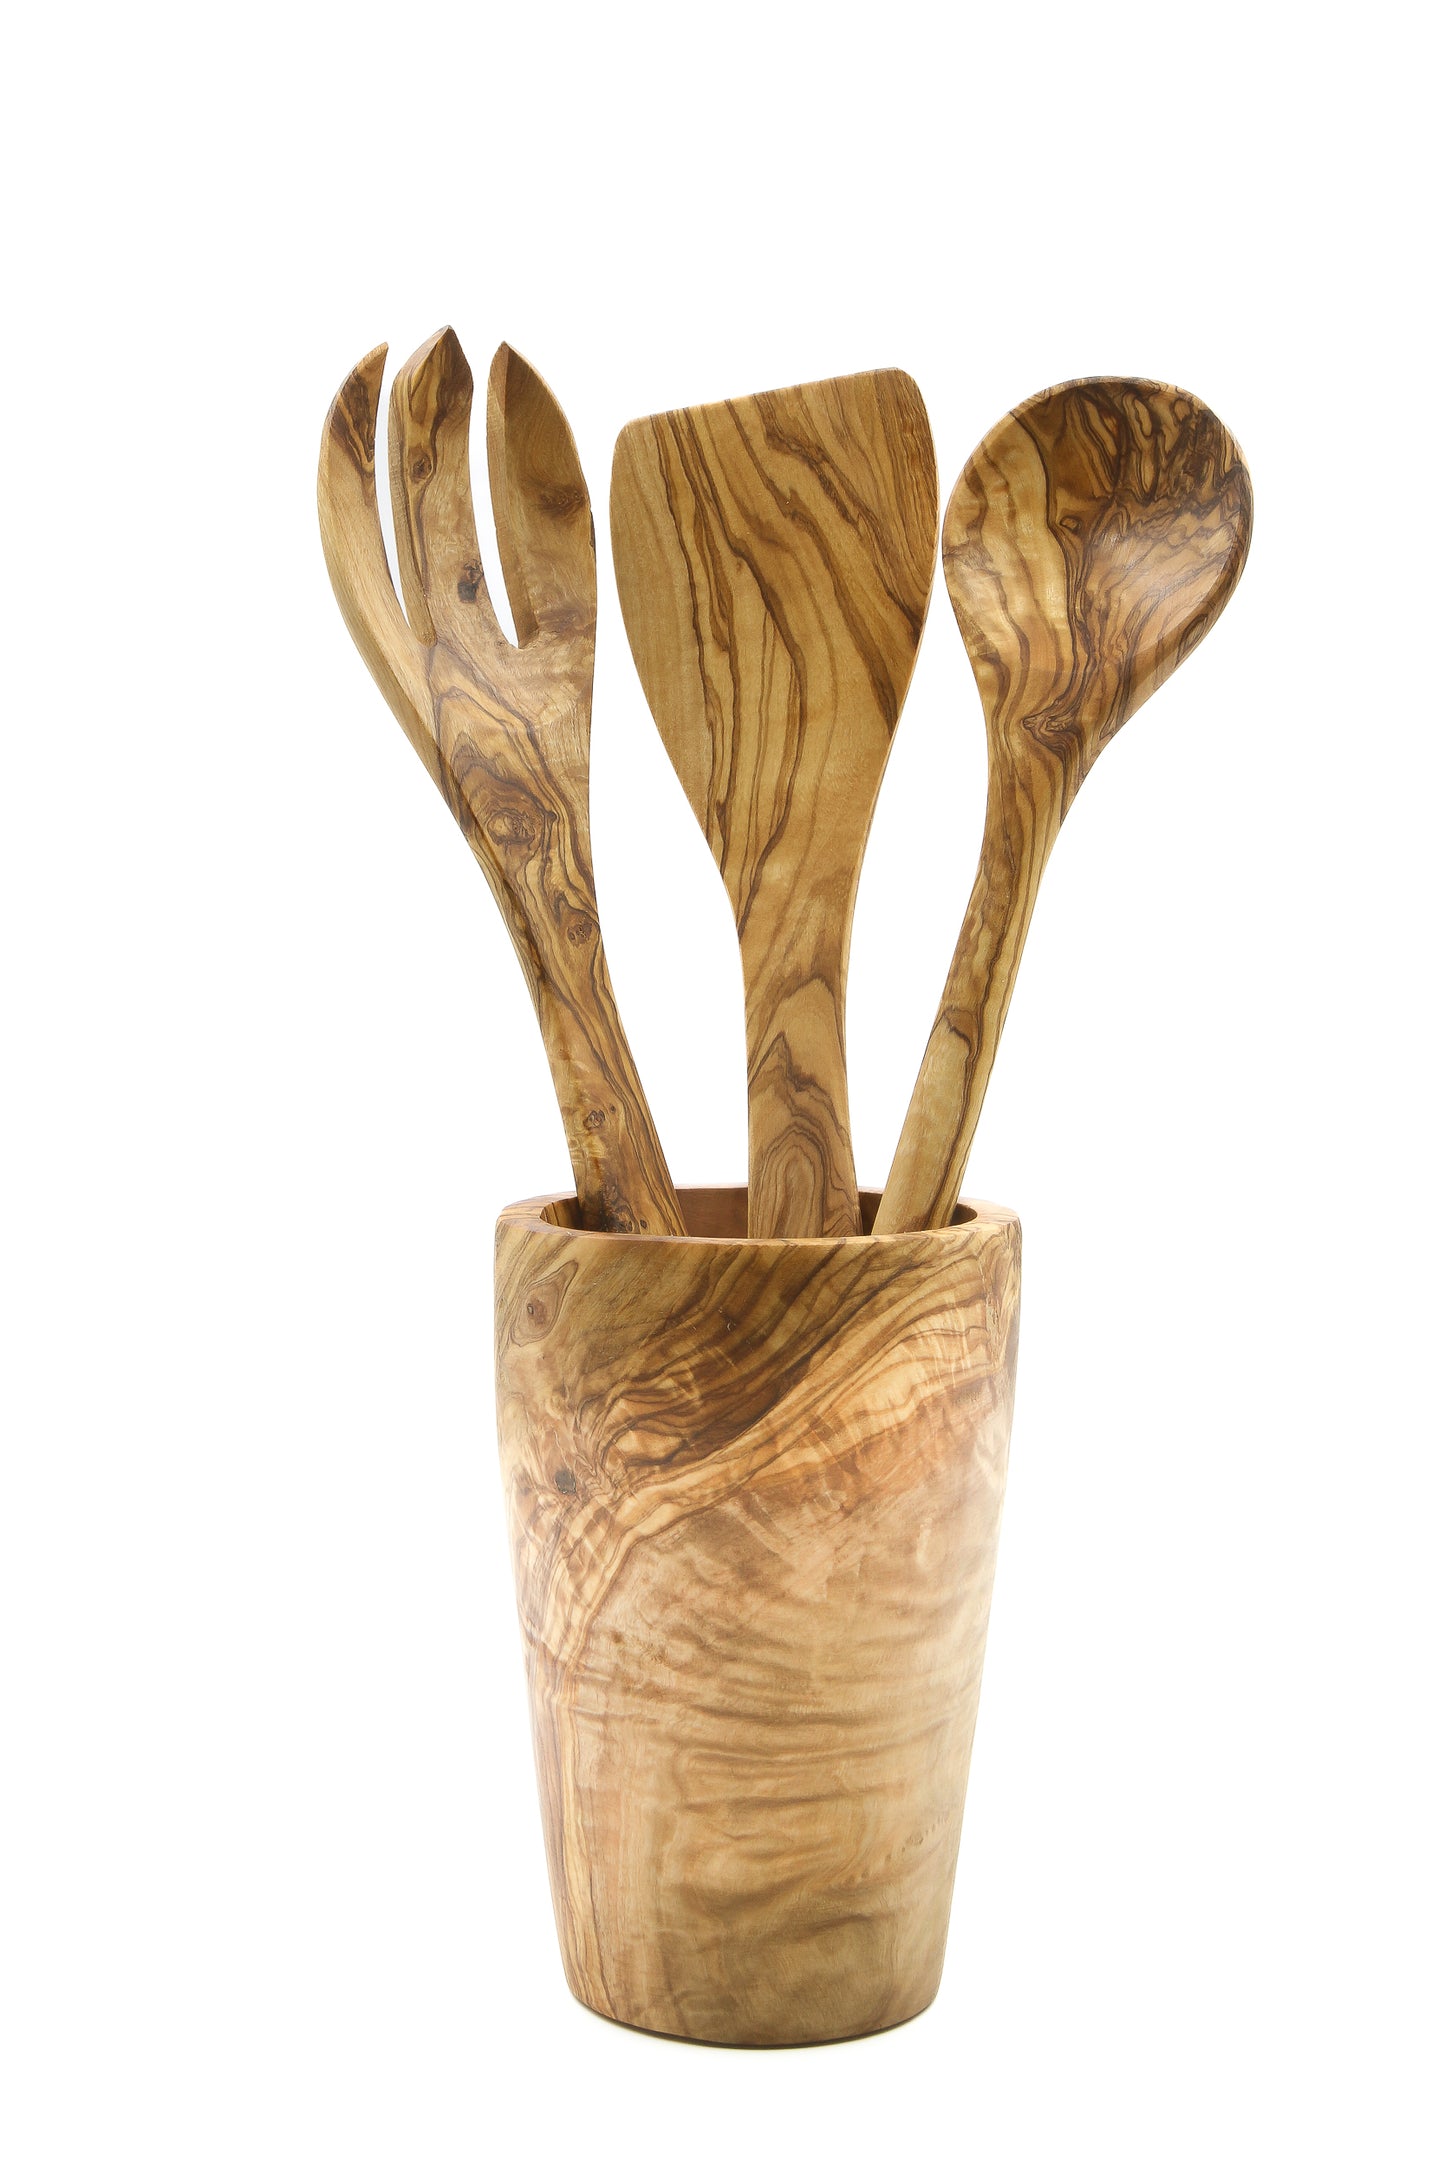 Hand-finished olive wood kitchenware essentials, complemented by a matching utensil holder